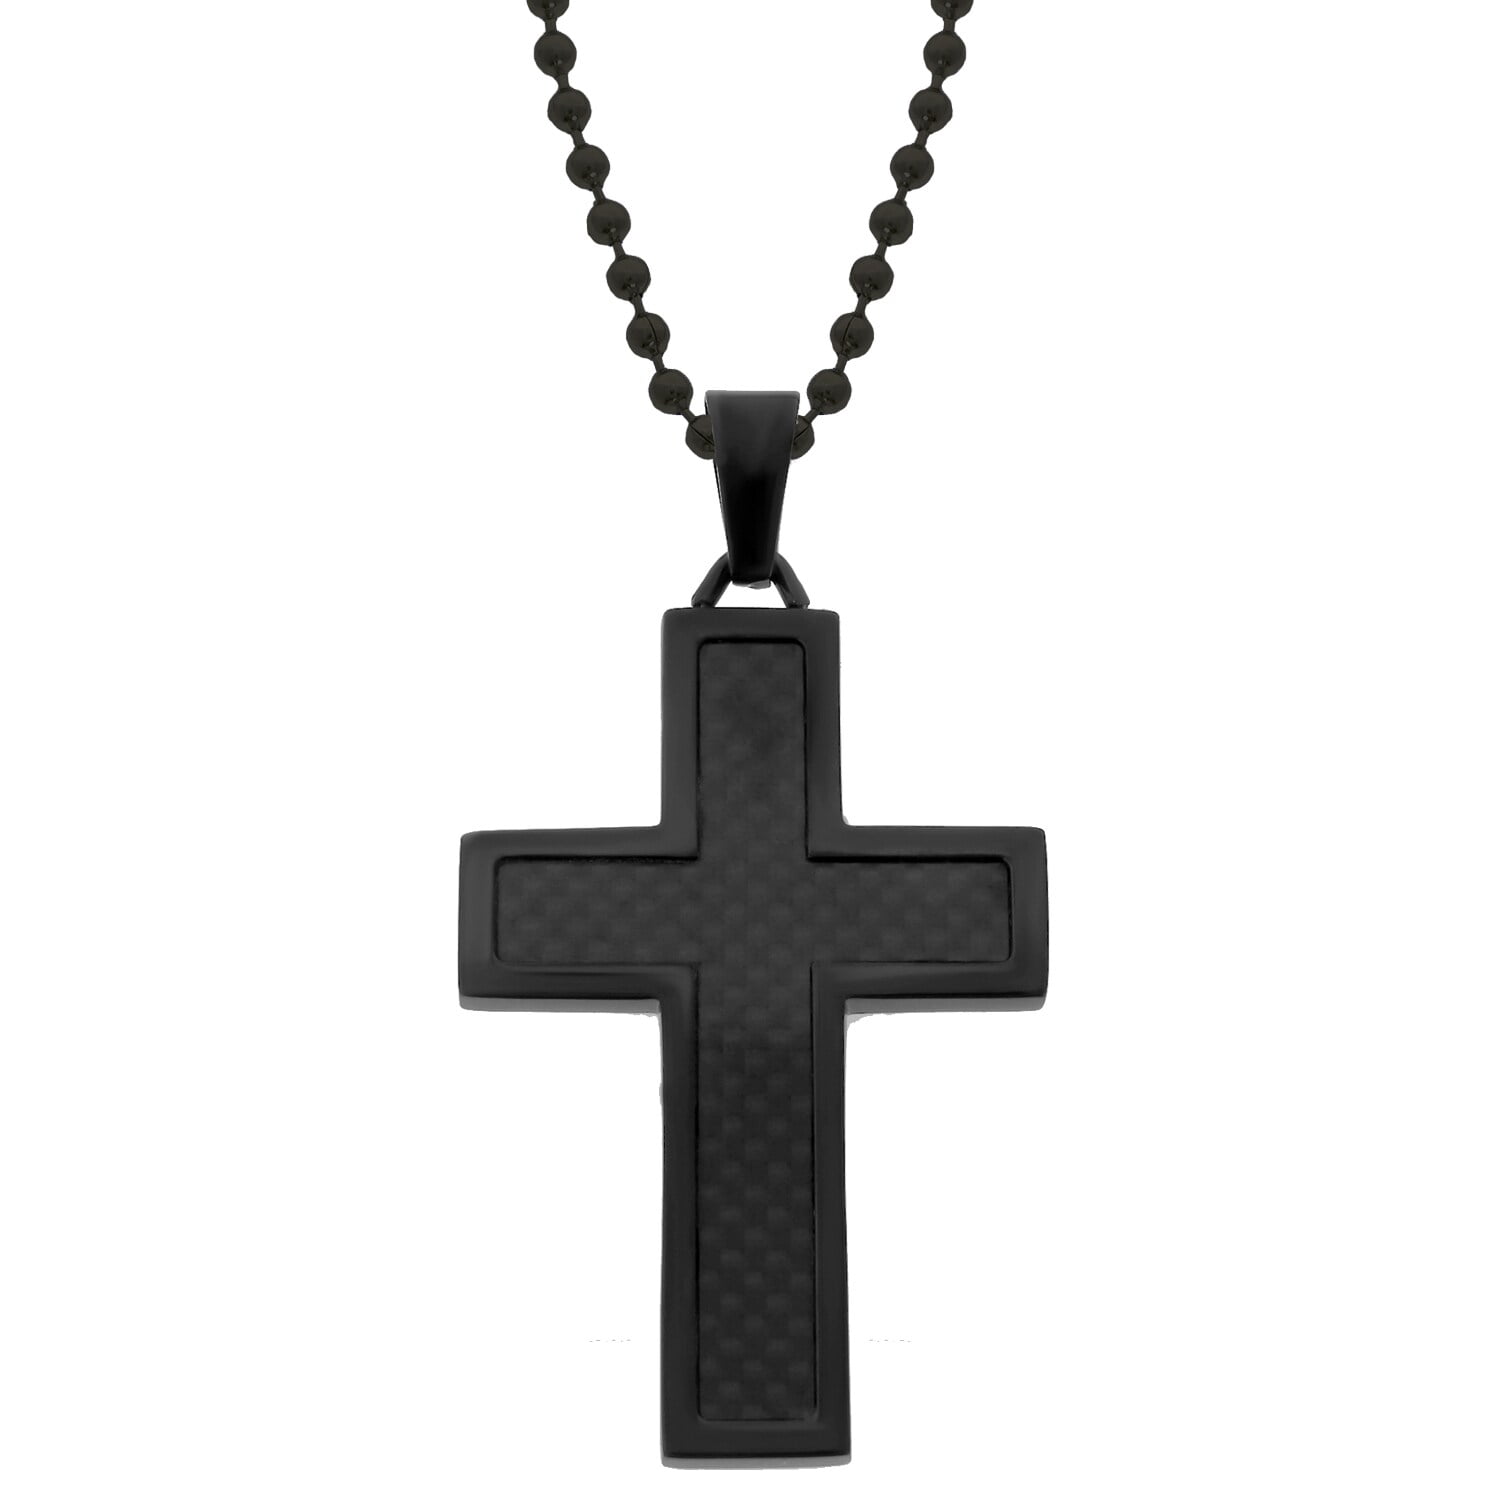 Blackplated Stainless Steel Carbon Fiber Cross Pendant Necklace